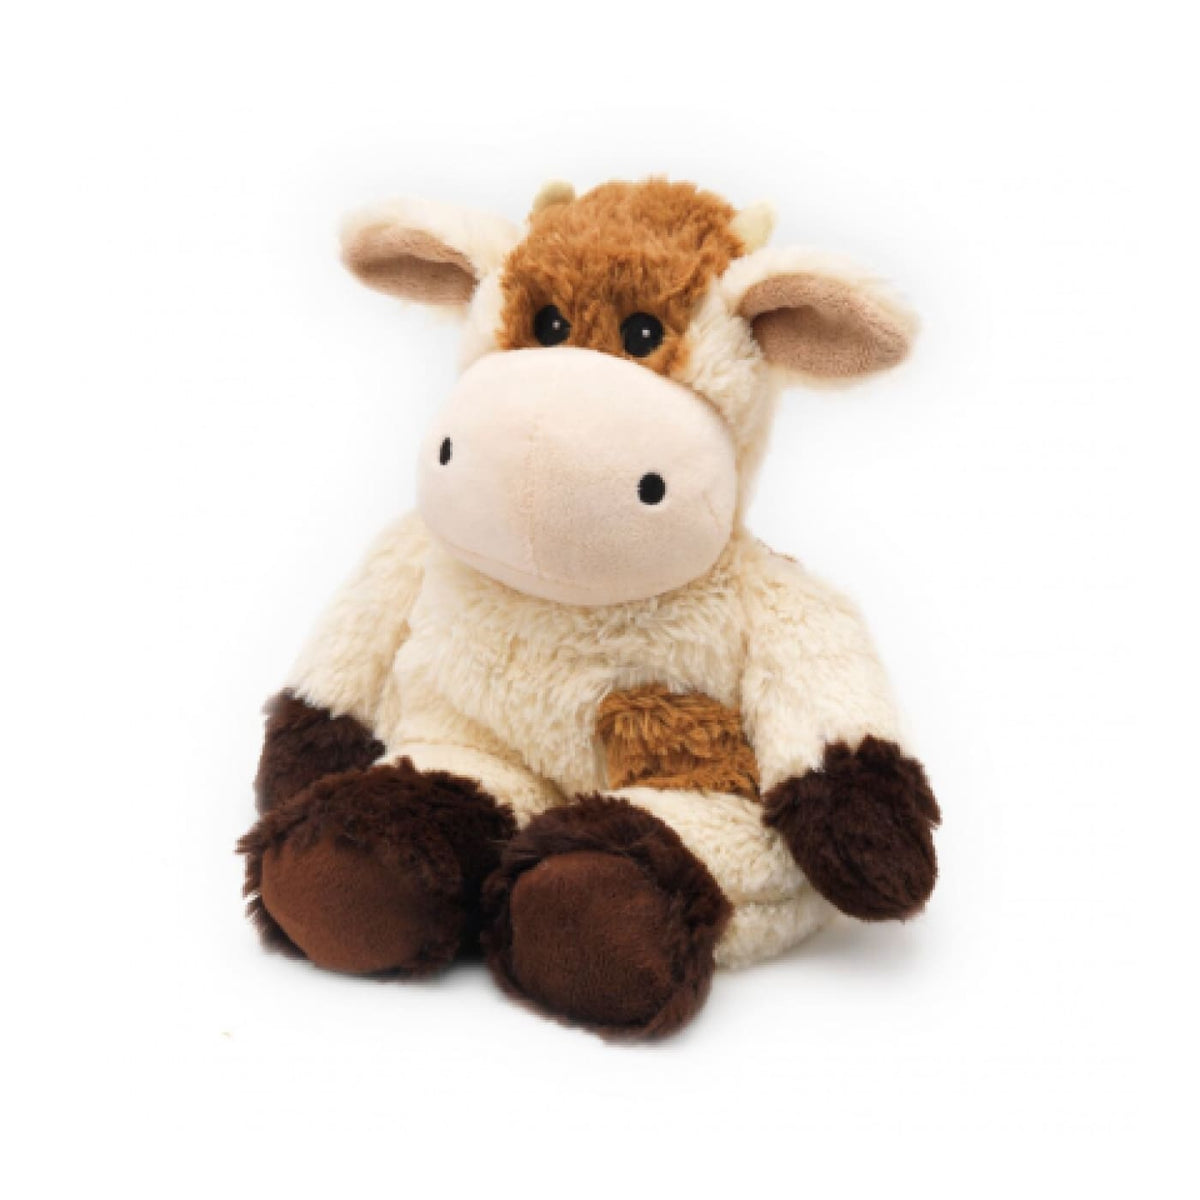 Warmies Cozy Plush - Cow - Cow - HEALTH &amp; HOME SAFETY - THERMOMETERS/MEDICINAL